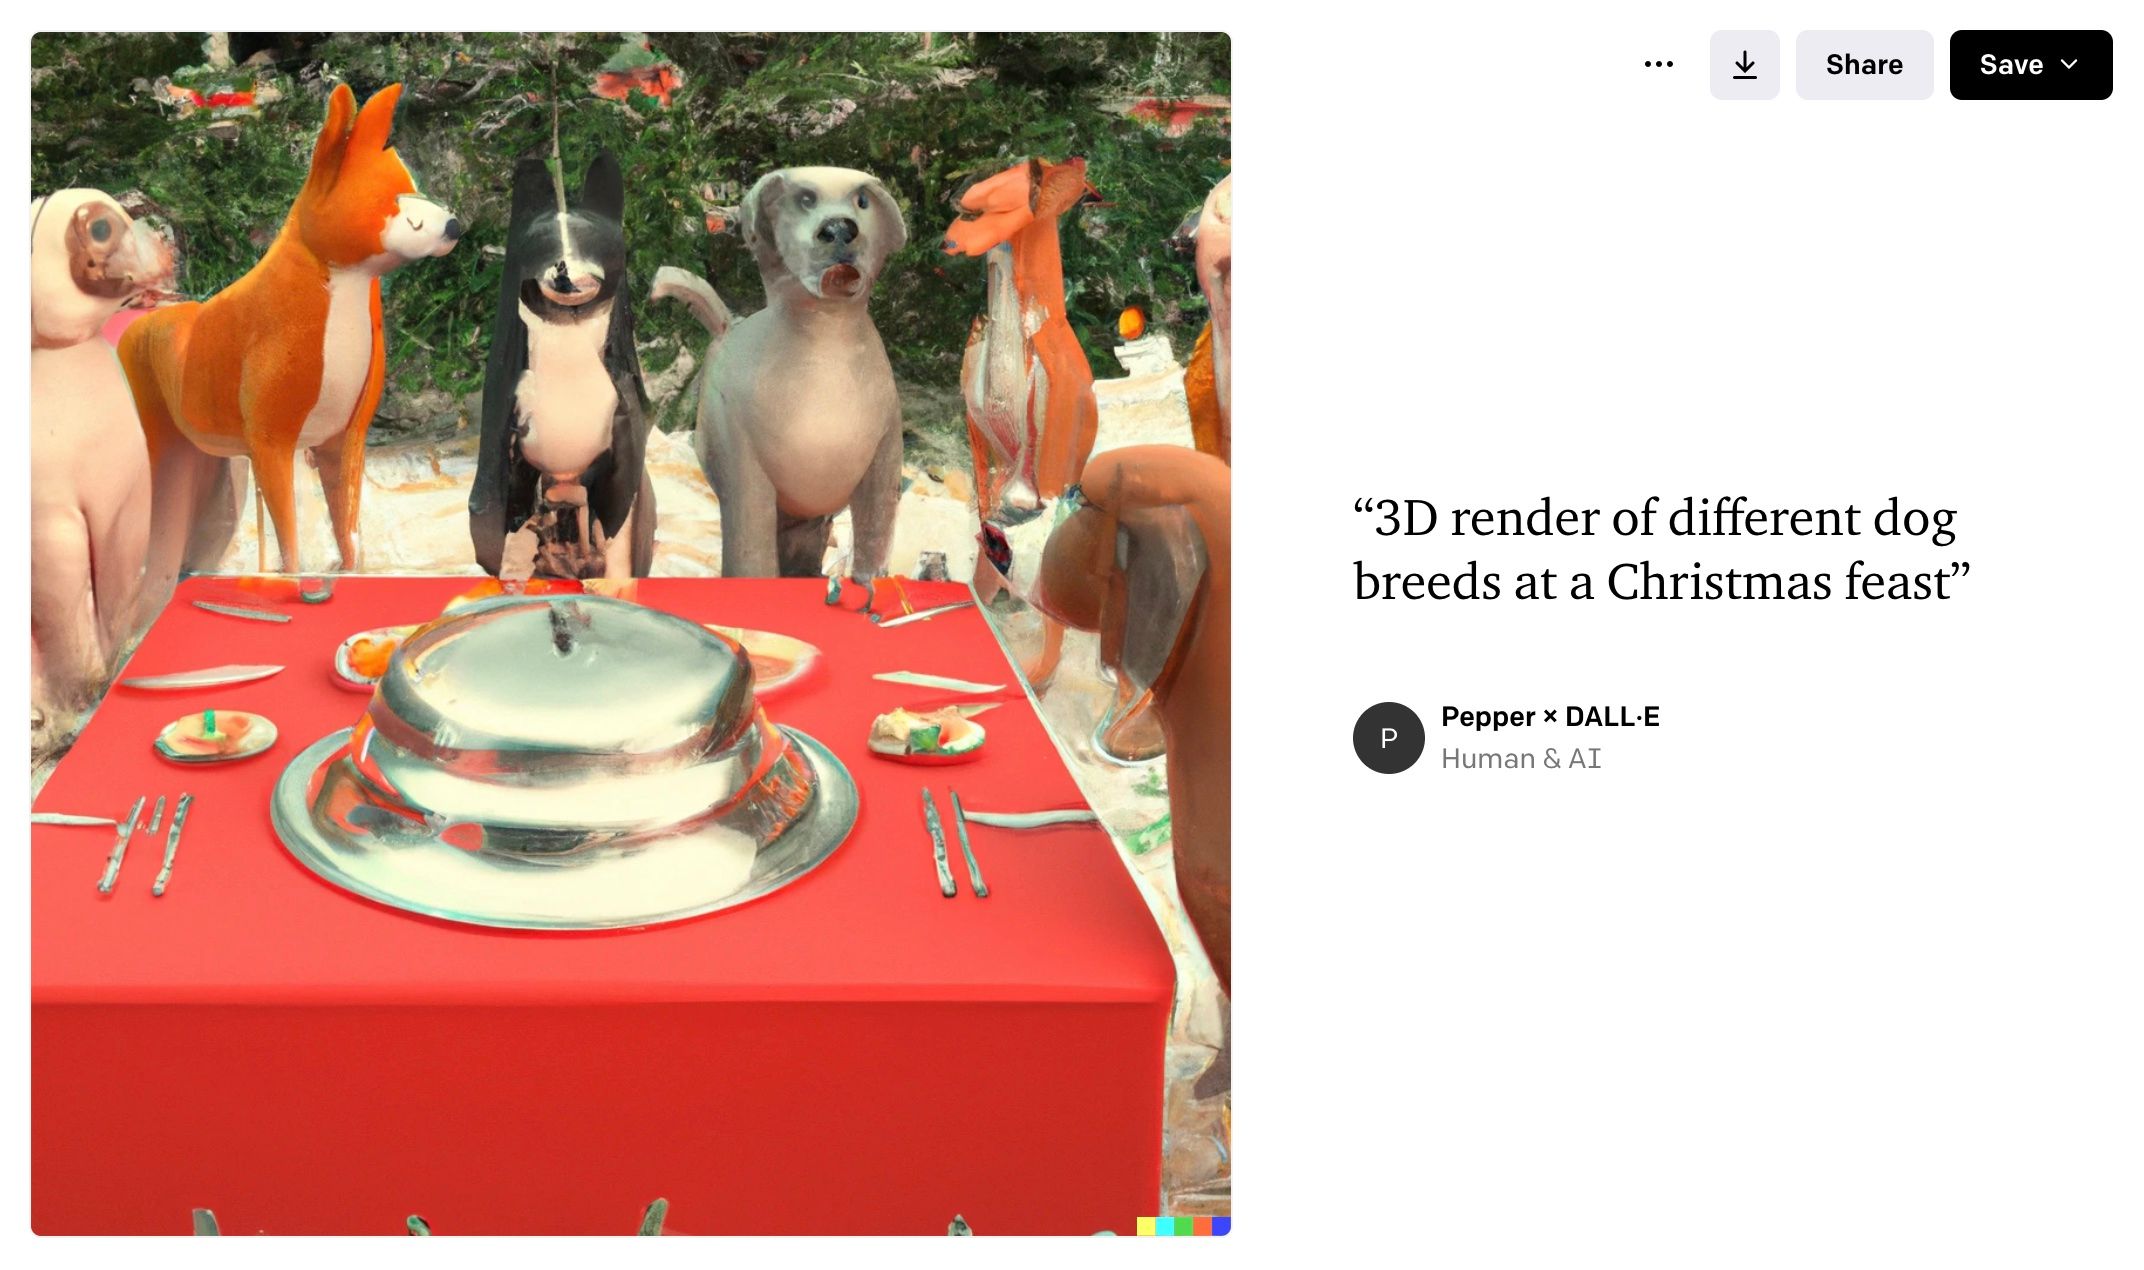 Screenshot of an image of dogs around a table created using Dall-E